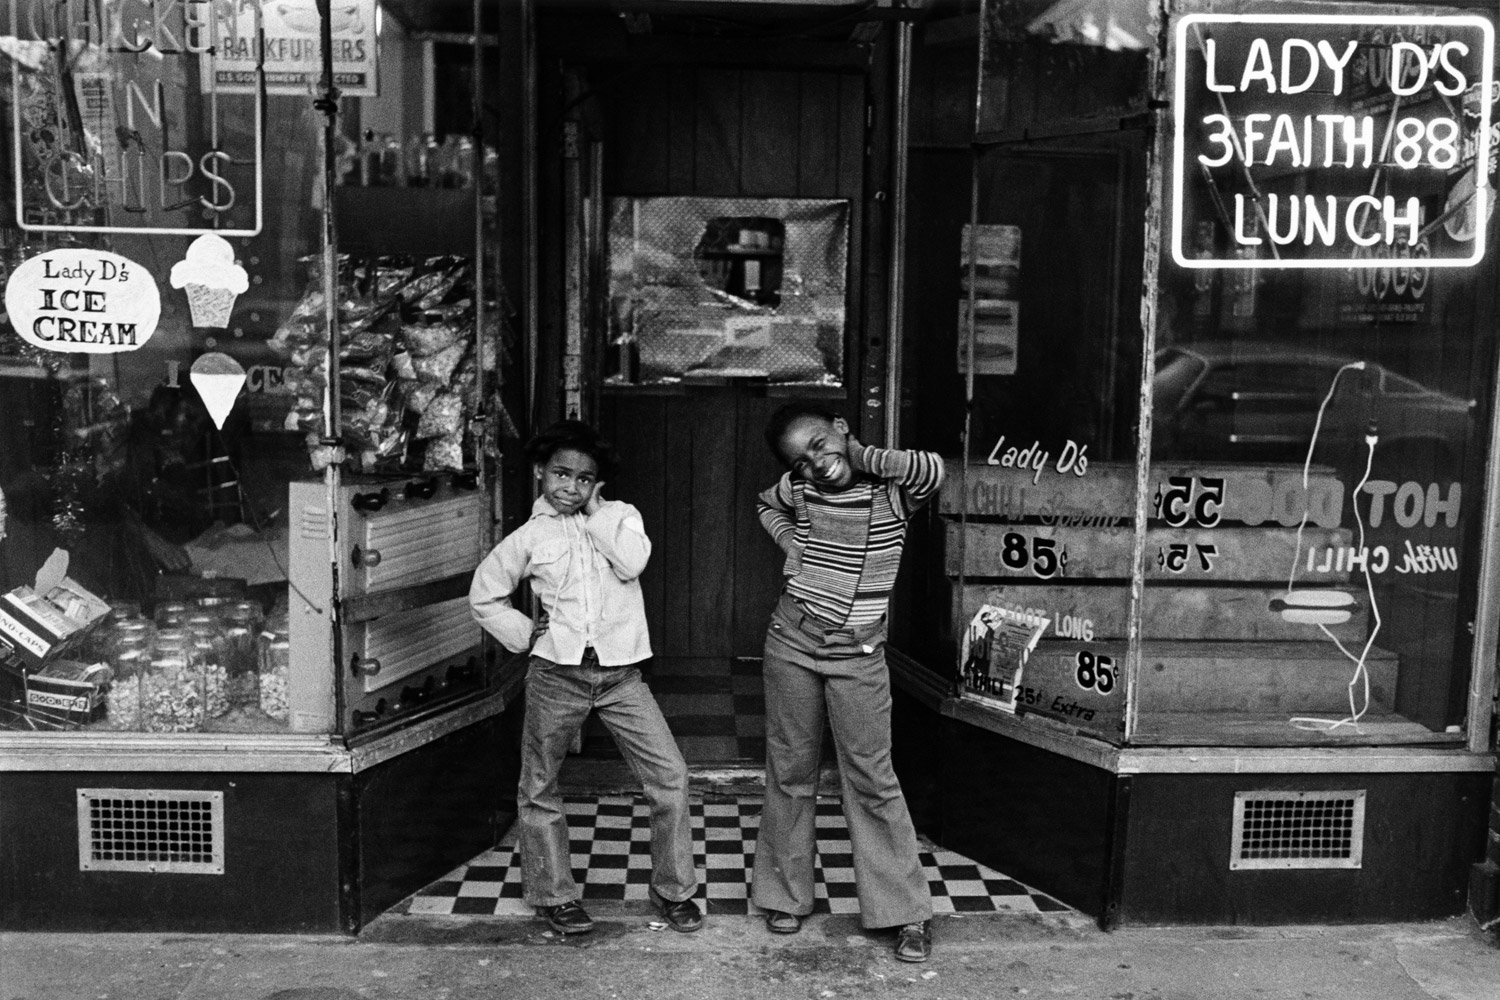 Two Girls in Front of Lady D’s, c. 1976